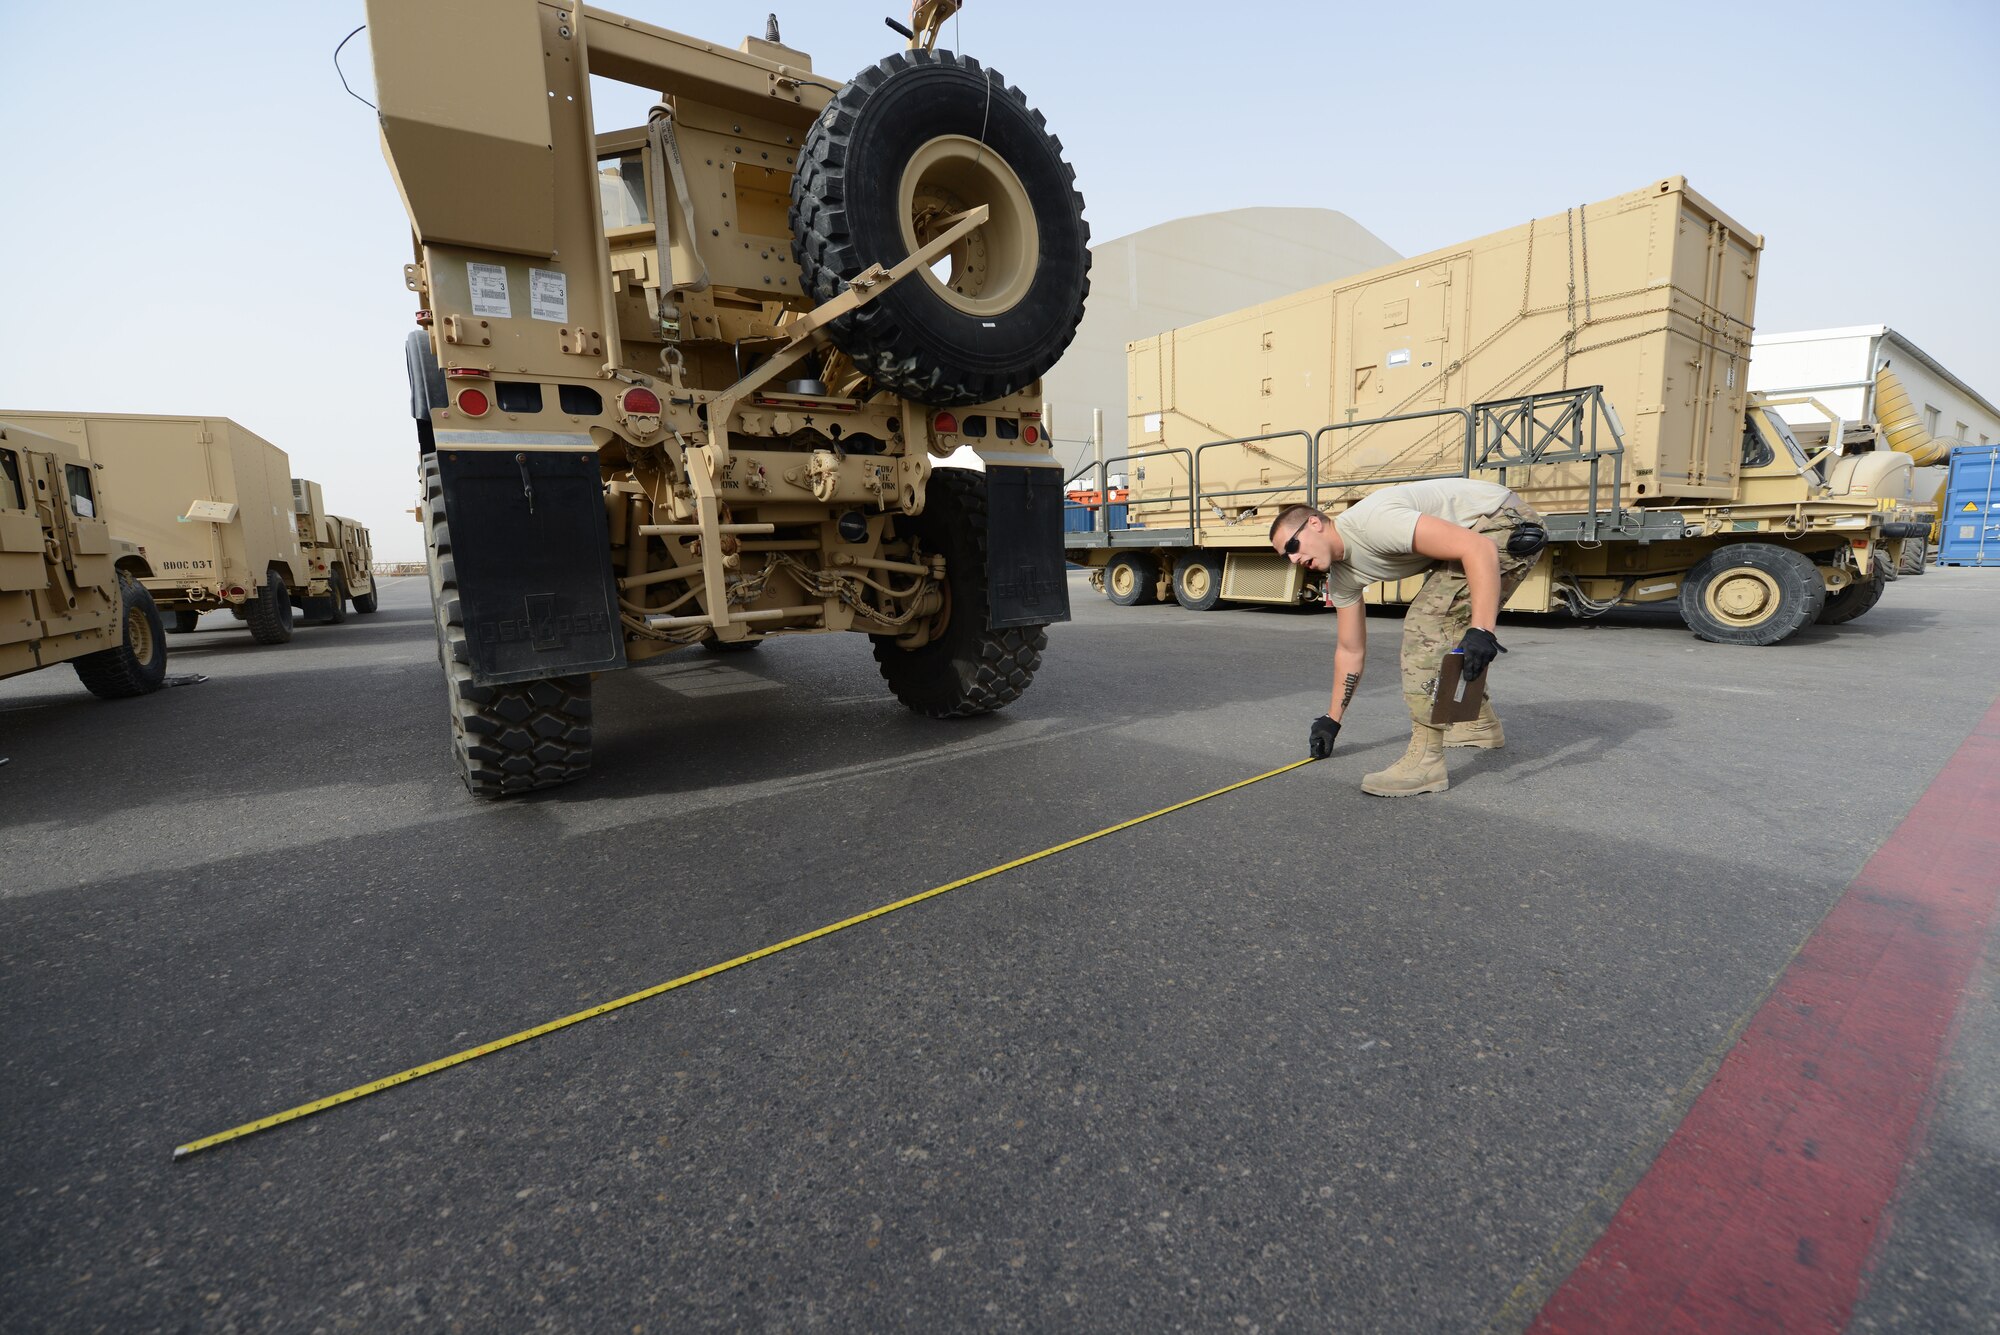 U.S. Air Force Tech. Sgt. Chaz Jensby, a night shift supervisor assigned to the 455th Expeditionary Aerial Port Squadron Detachment 1, measures the width of a Mine Resistant Ambush Protected All-Terrain Vehicle as part of inspection procedures at Mazar-e Sharif, Afghanistan June 24, 2014. Before accepting vehicles for shipment, Jensby is responsible for ensuring the weight matches the shipping paperwork and the vehicles are cleaned. If these aren’t done, the vehicle is returned to the customer. Jensby, a native of Lincoln, Neb., is a reservist deployed from the 155th Air Refueling Wing, Lincoln, Neb. (U.S. Air Force photo by Master Sgt. Cohen A. Young/Released)  